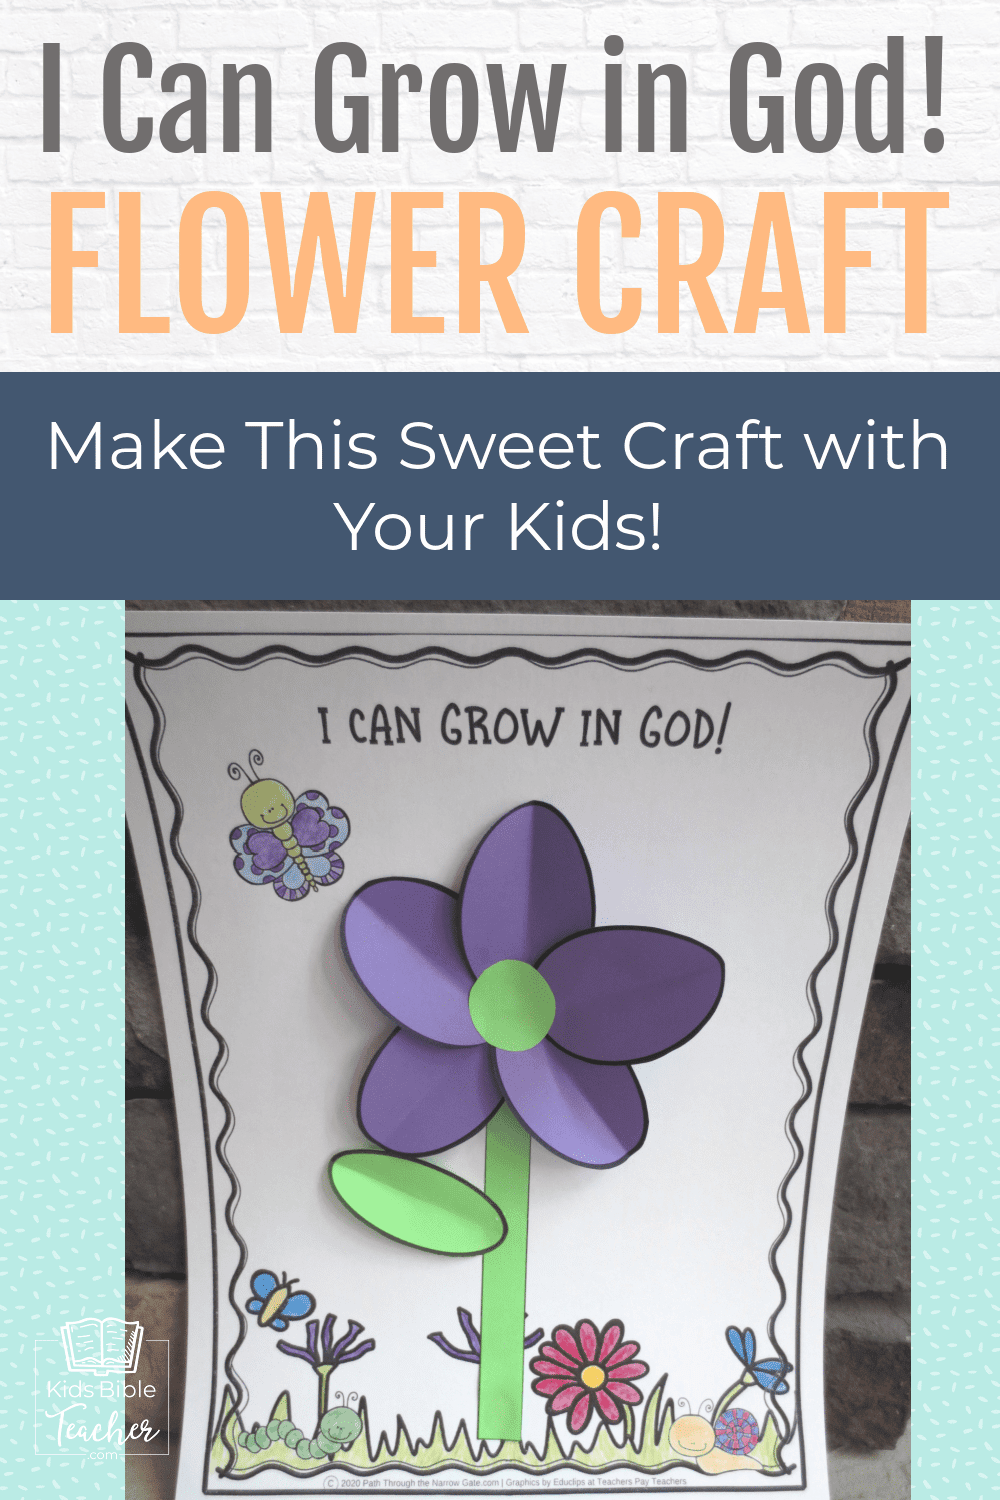 Remind your kids that they can "grow in God" - with this printable flower craft, perfect for Sunday school, Christian school, or home use!